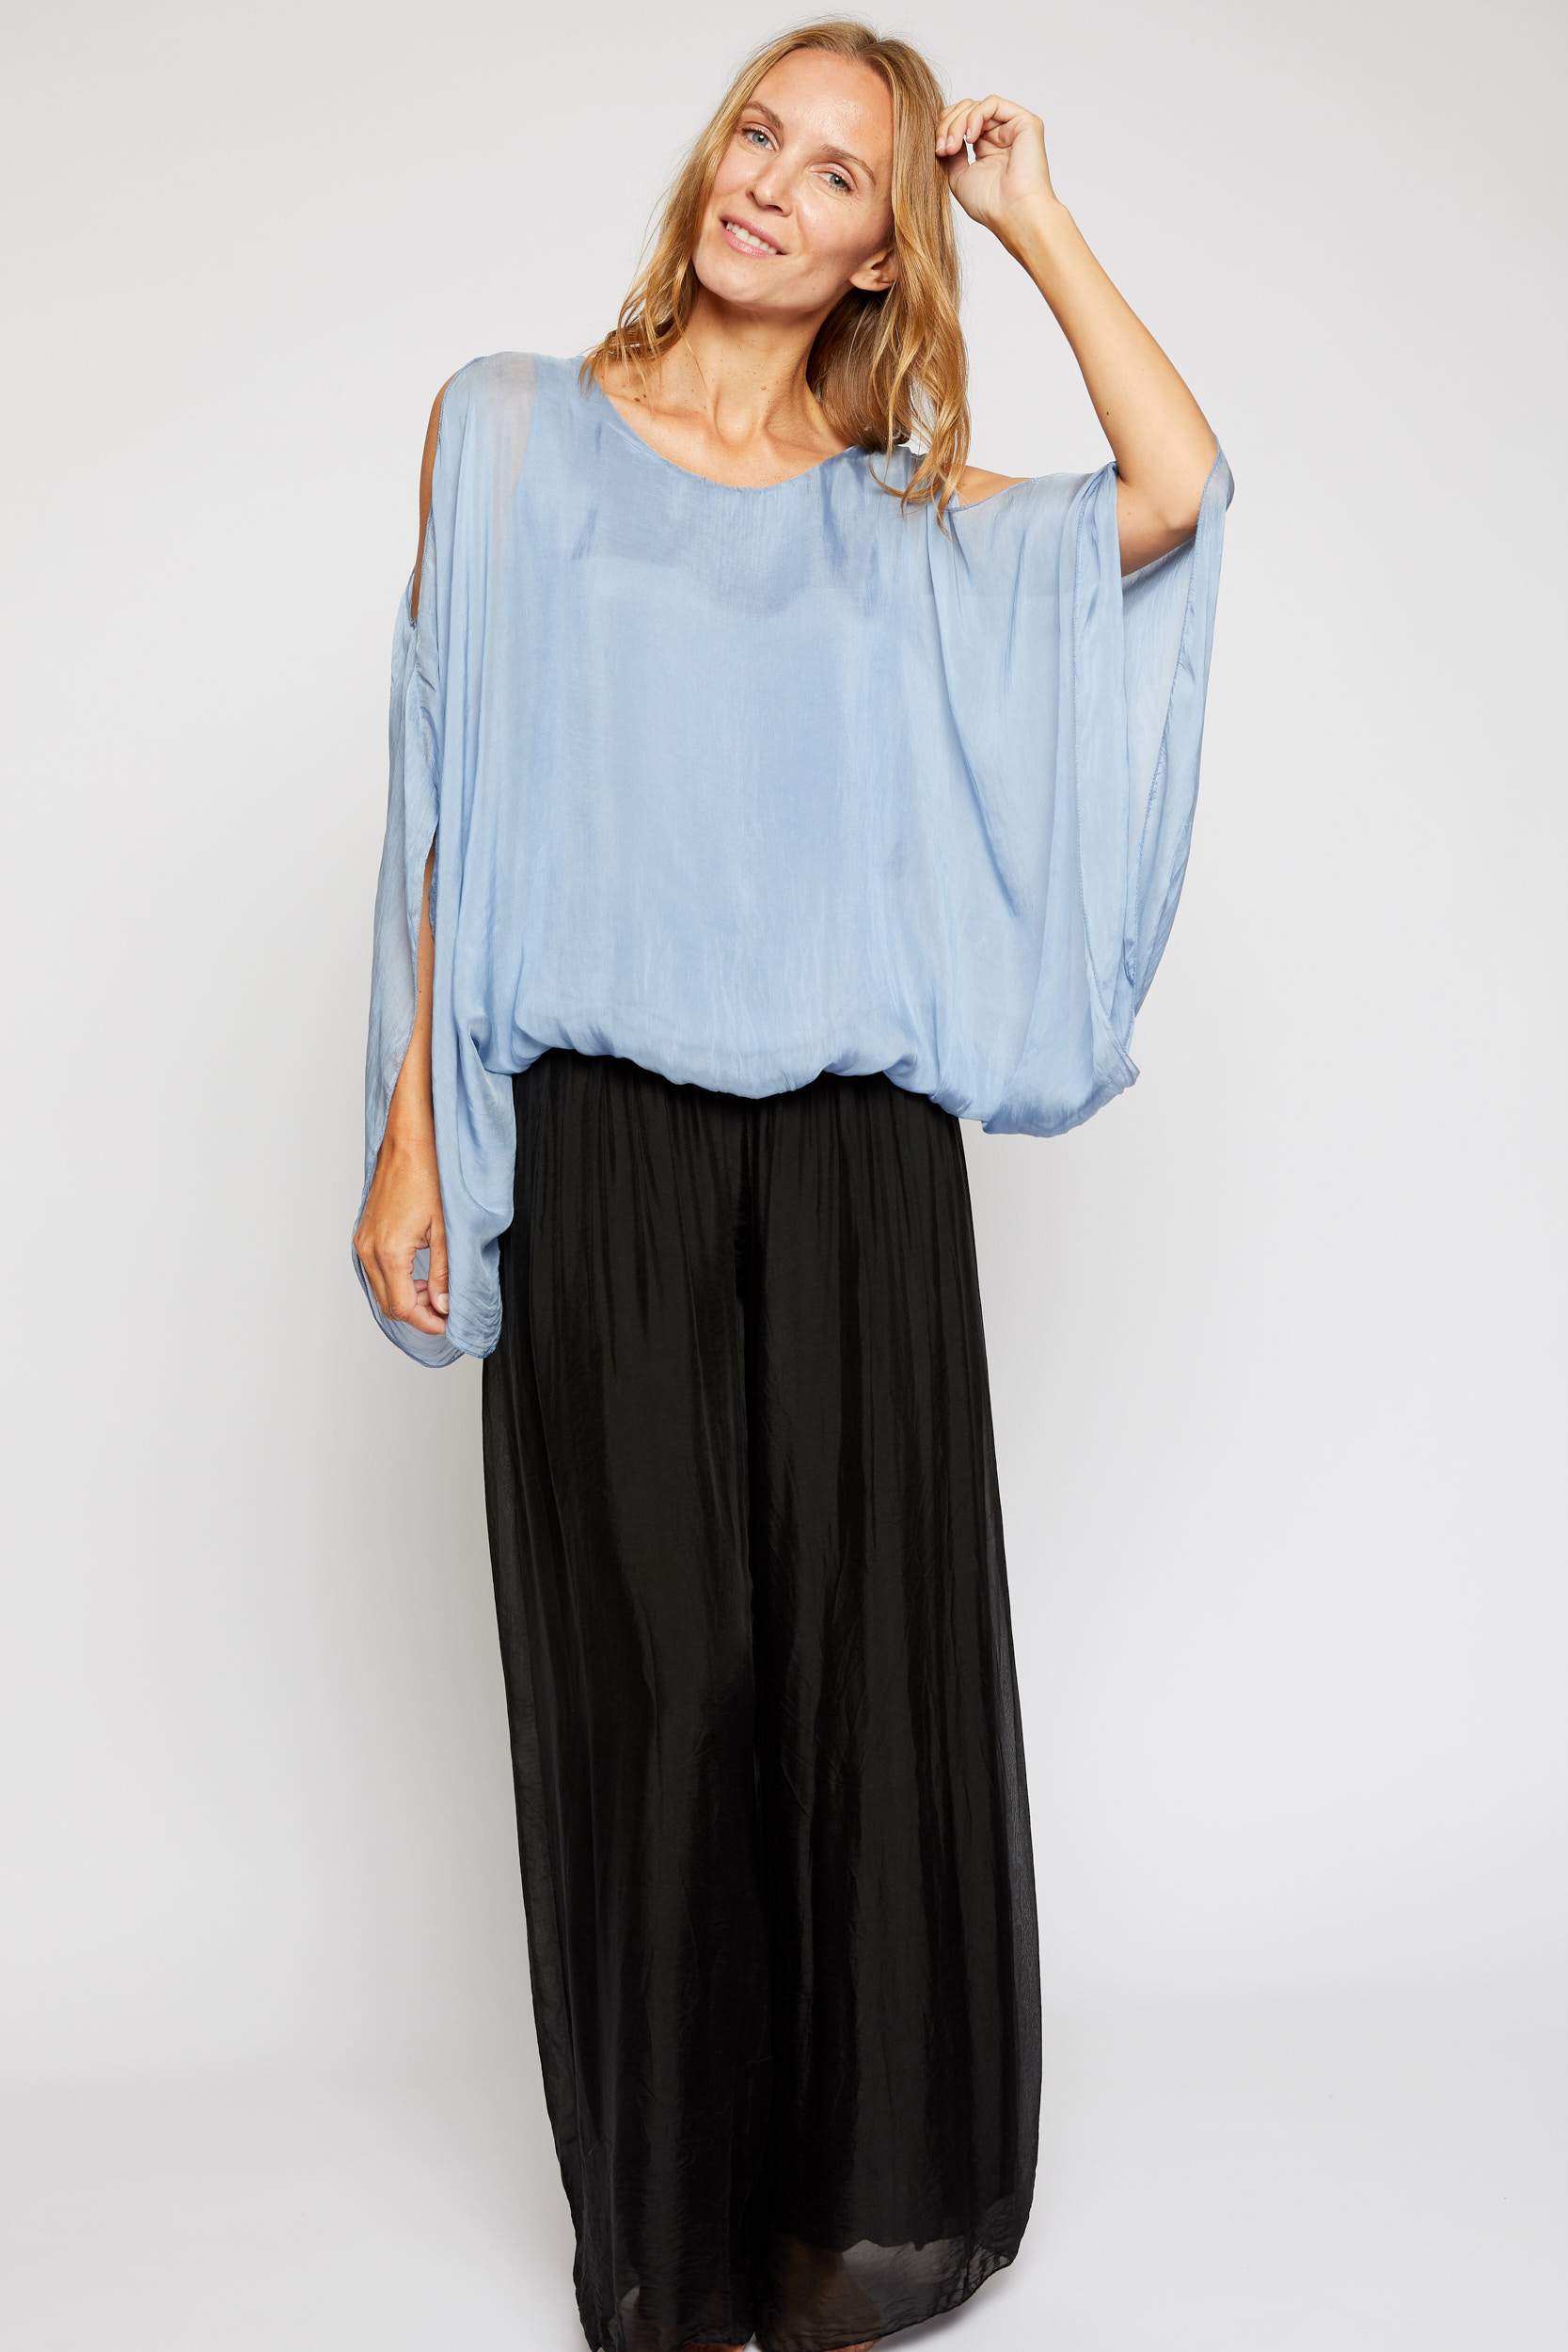 Italian Silk Cold Should Top - Jacqueline B Clothing